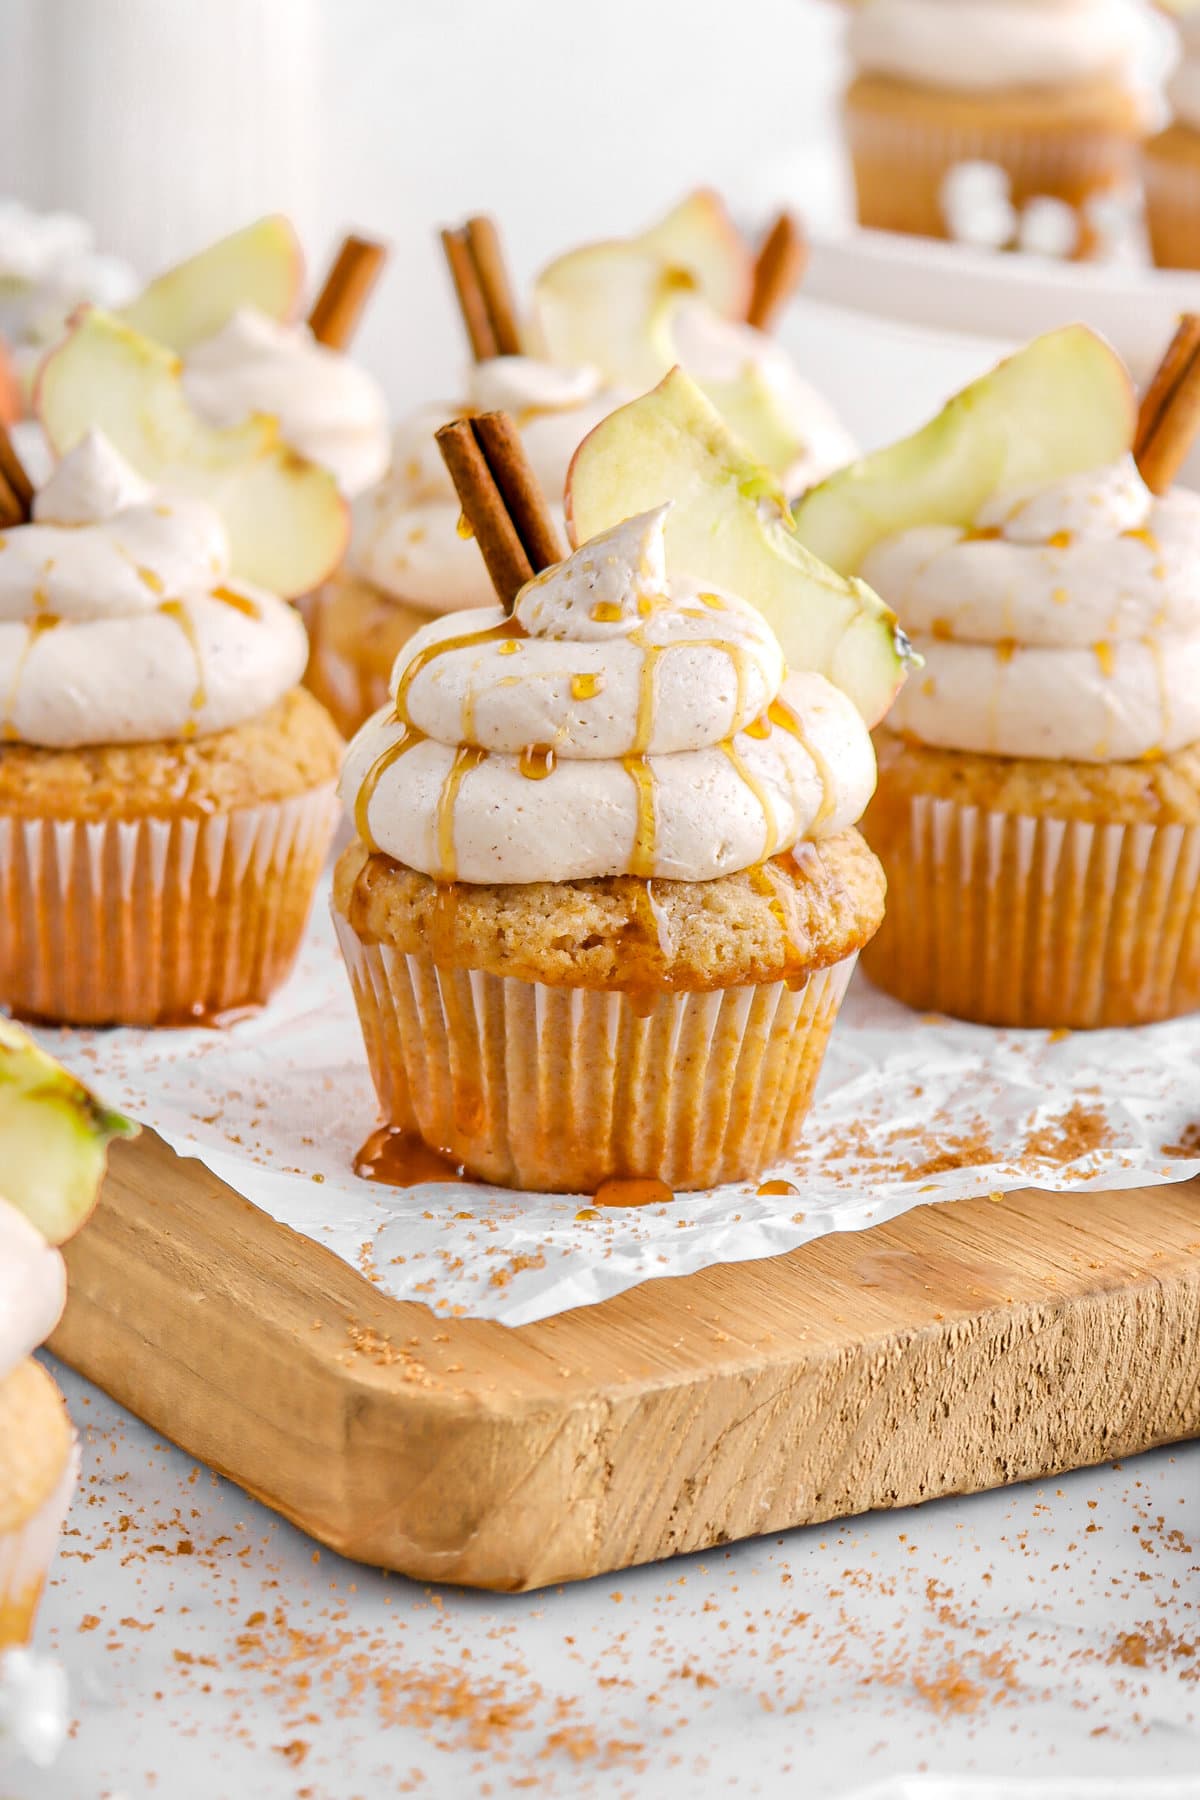 cupcakes on wood board with piped frosting, cinnamon stick, and an apple slice on each cupcake.